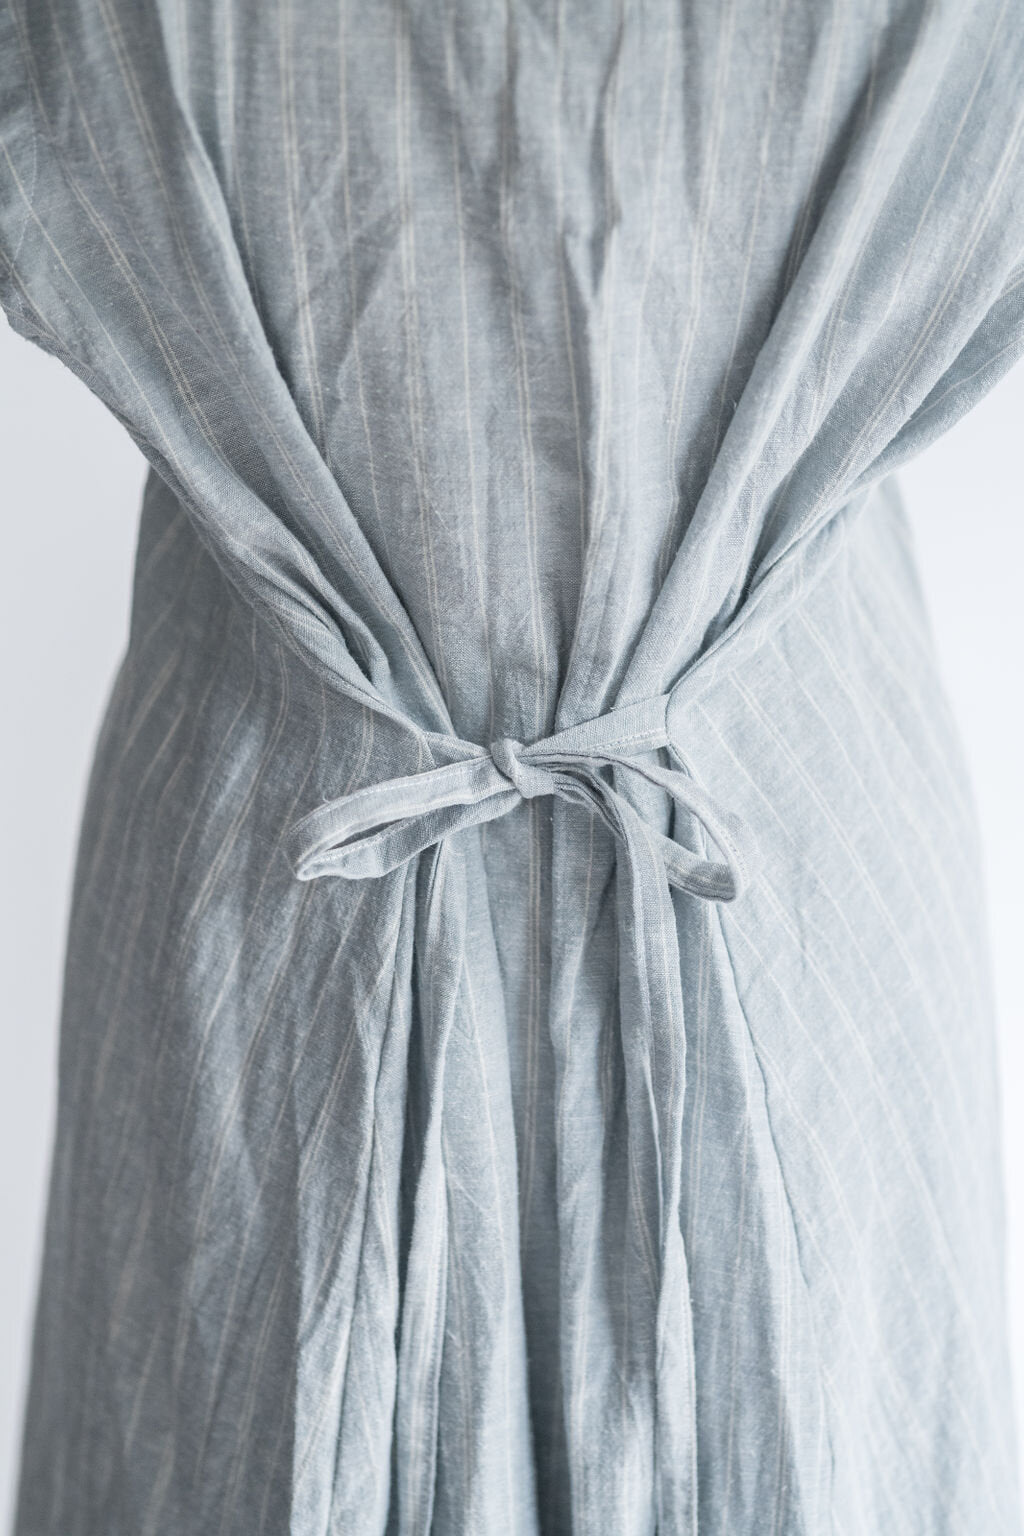 Back of the Adult Linen Dress